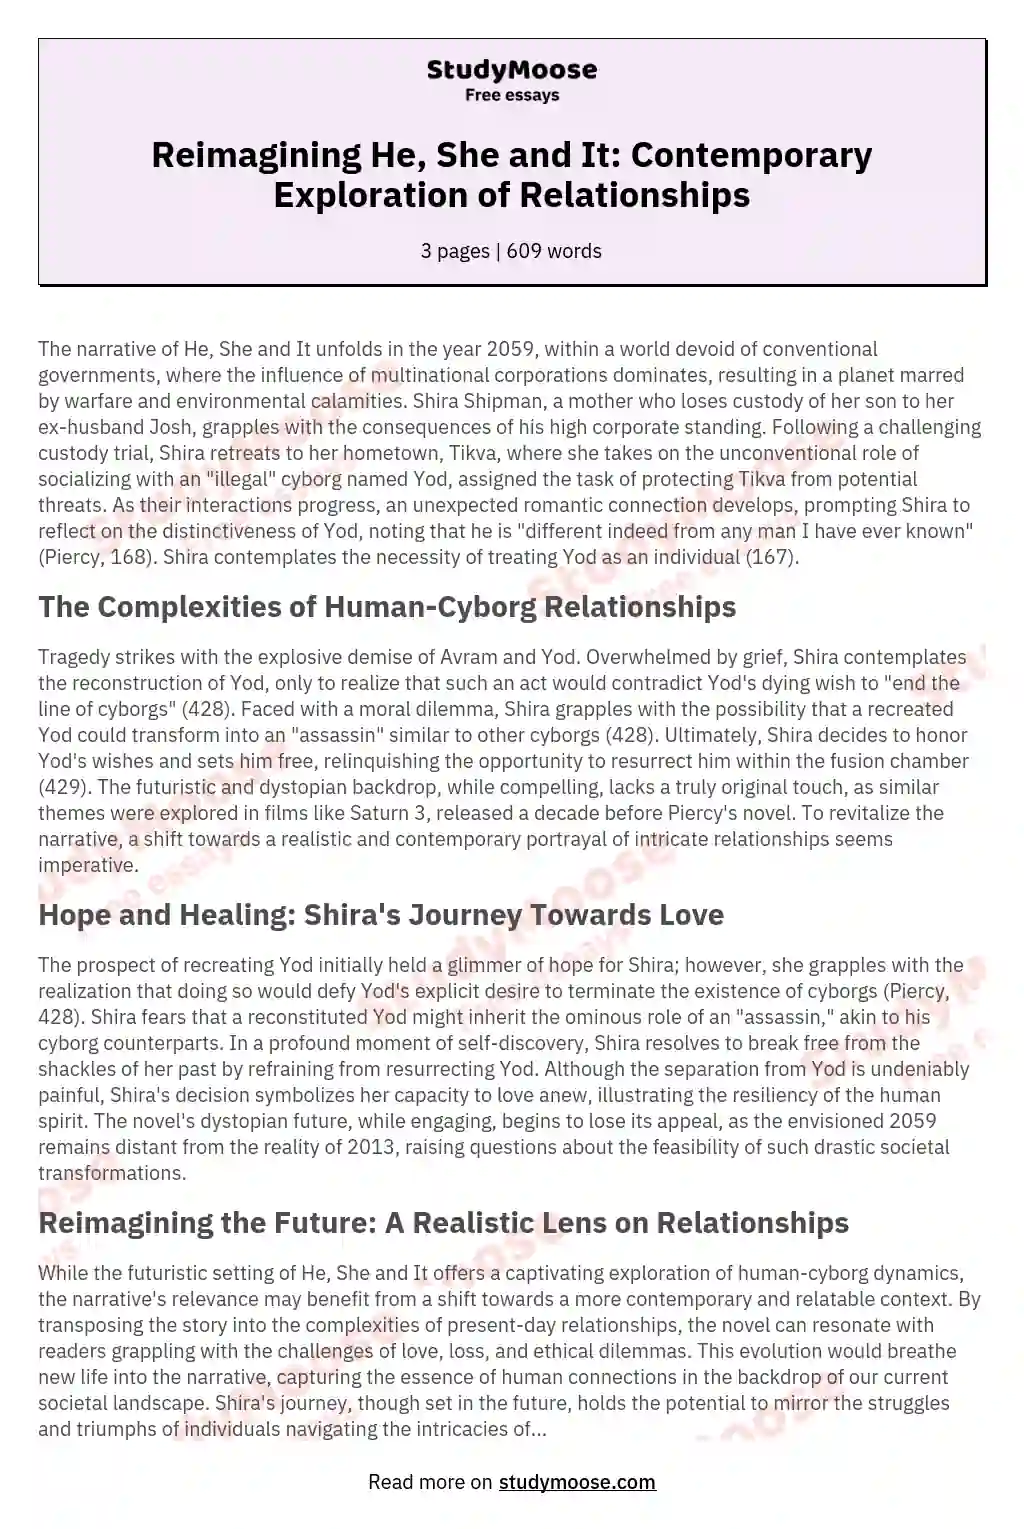 Reimagining He, She and It: Contemporary Exploration of Relationships essay